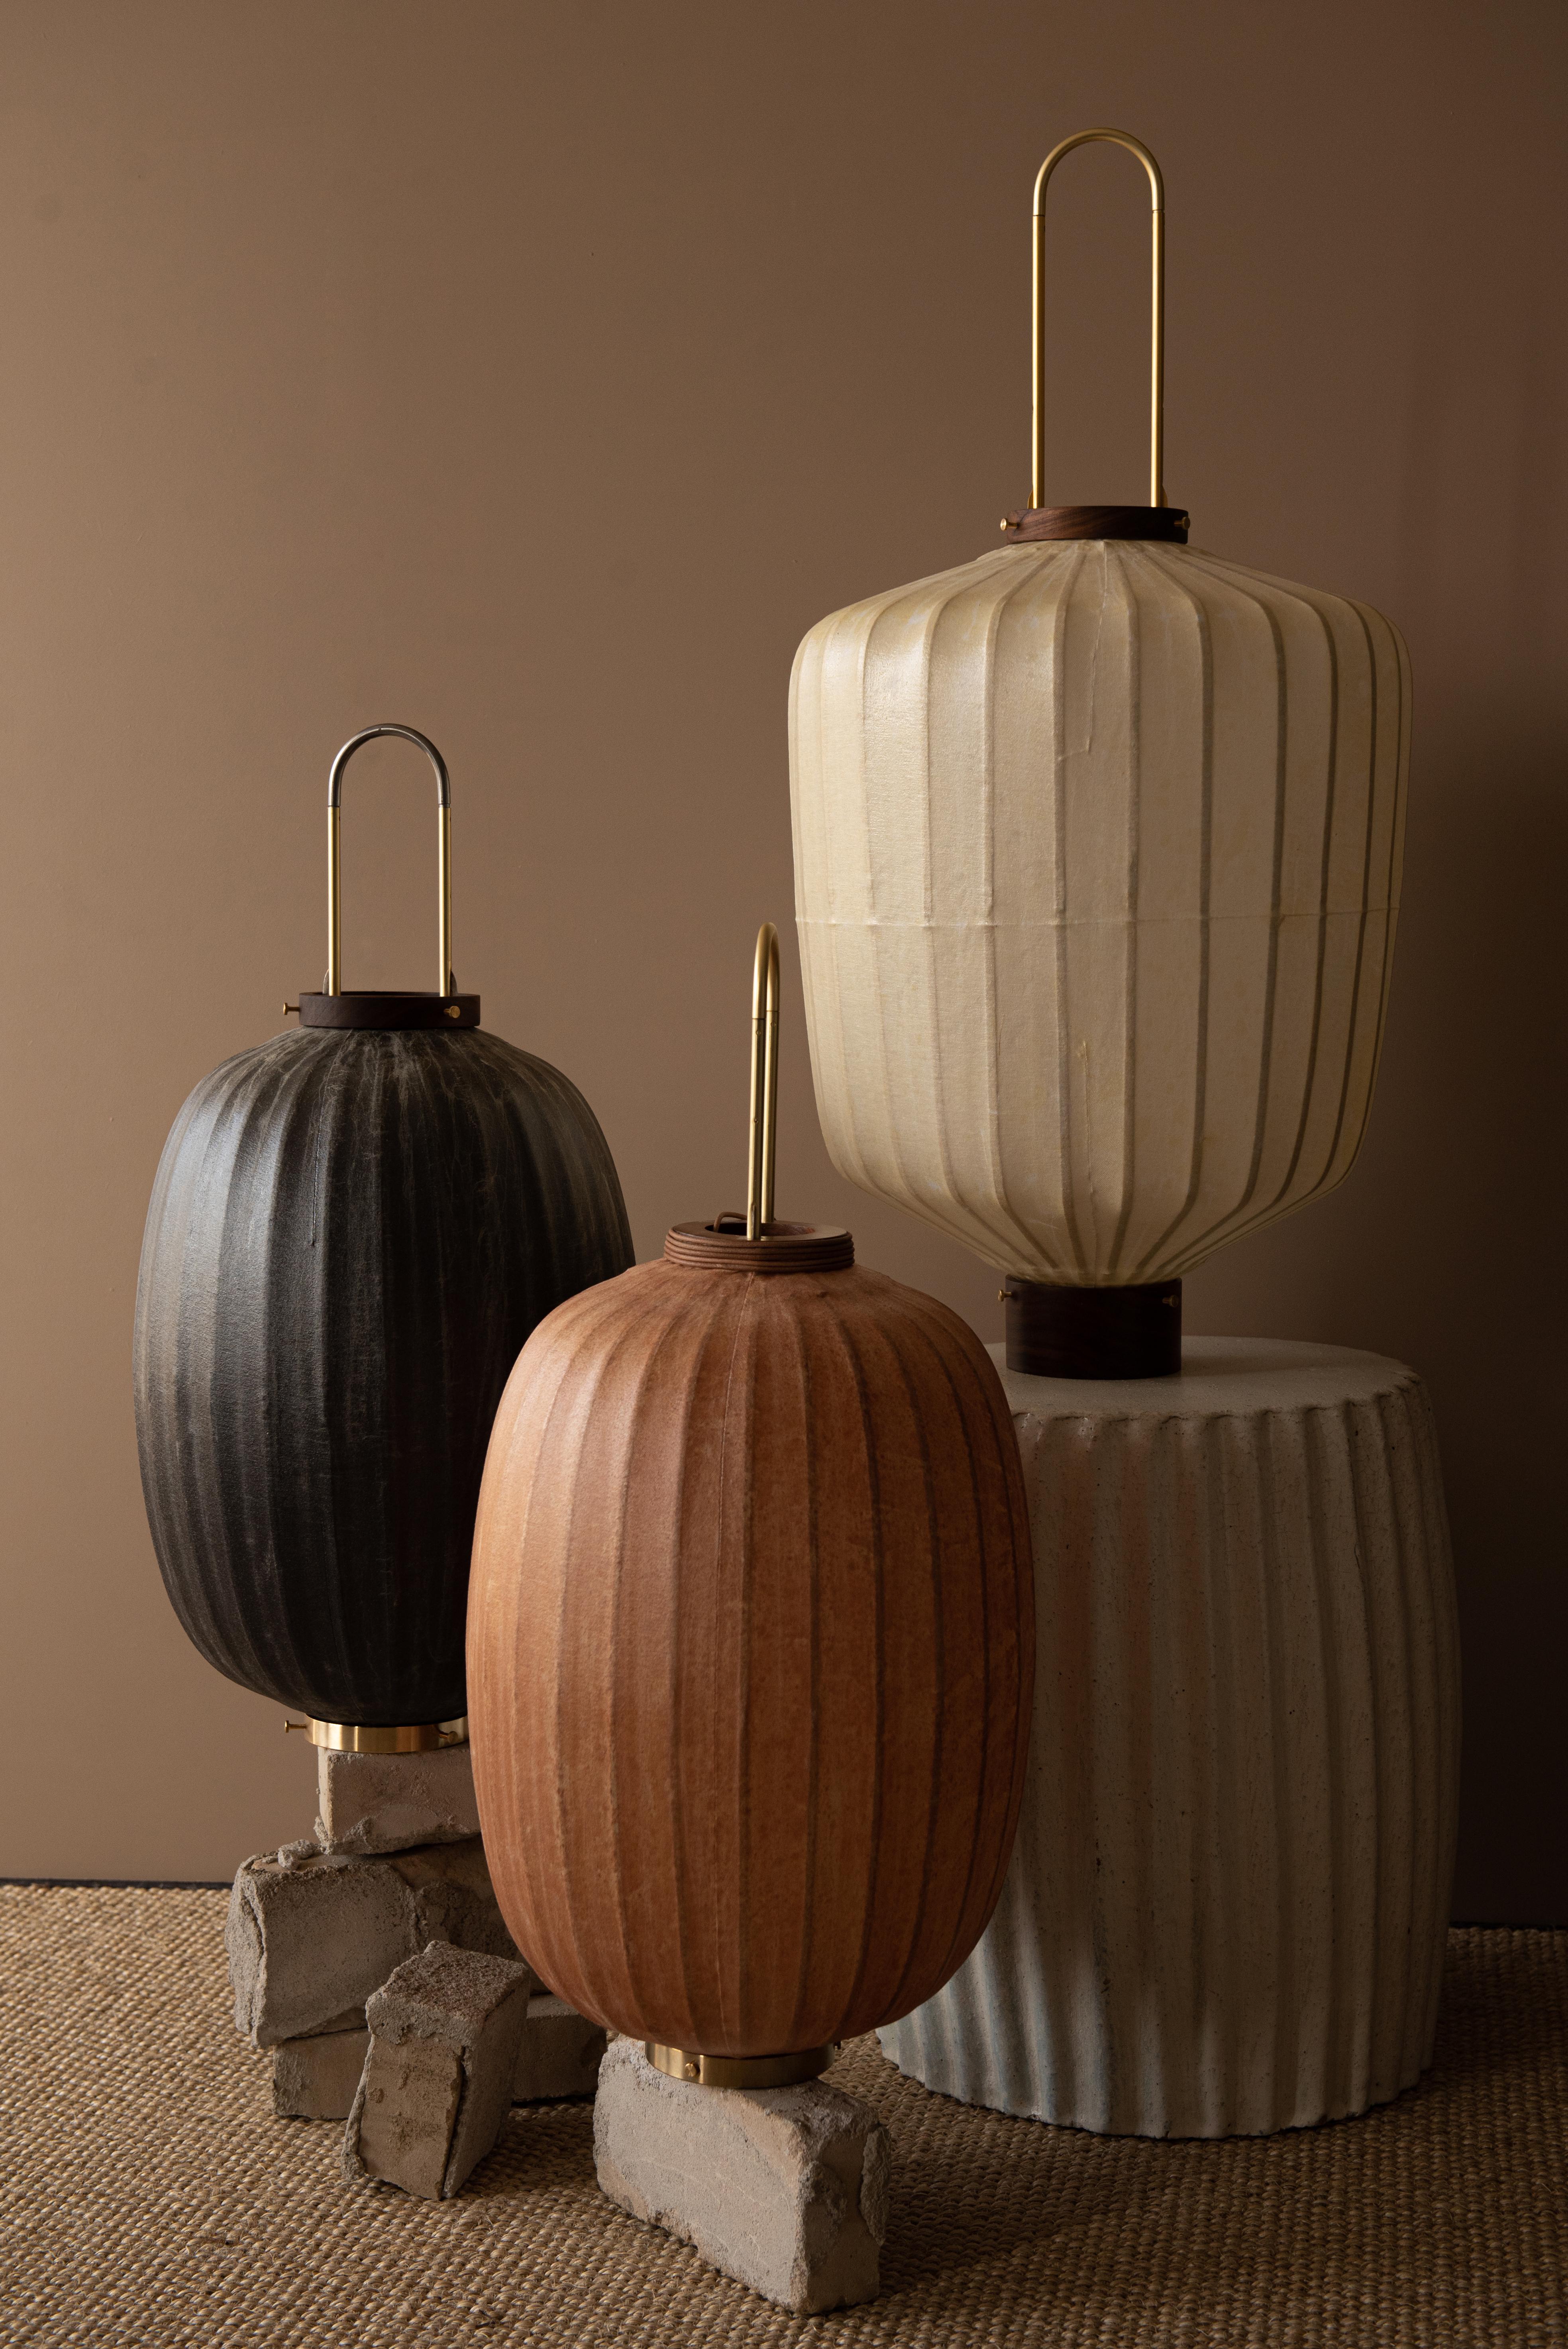 Neo-traditional, handcrafted lanterns from Taiwan. Made to order.

TAIWAN-LANTERN is a beautiful, modern line of pendant lights using natural materials and traditional craft. They work with the finest local artisans and Taiwan's last traditional